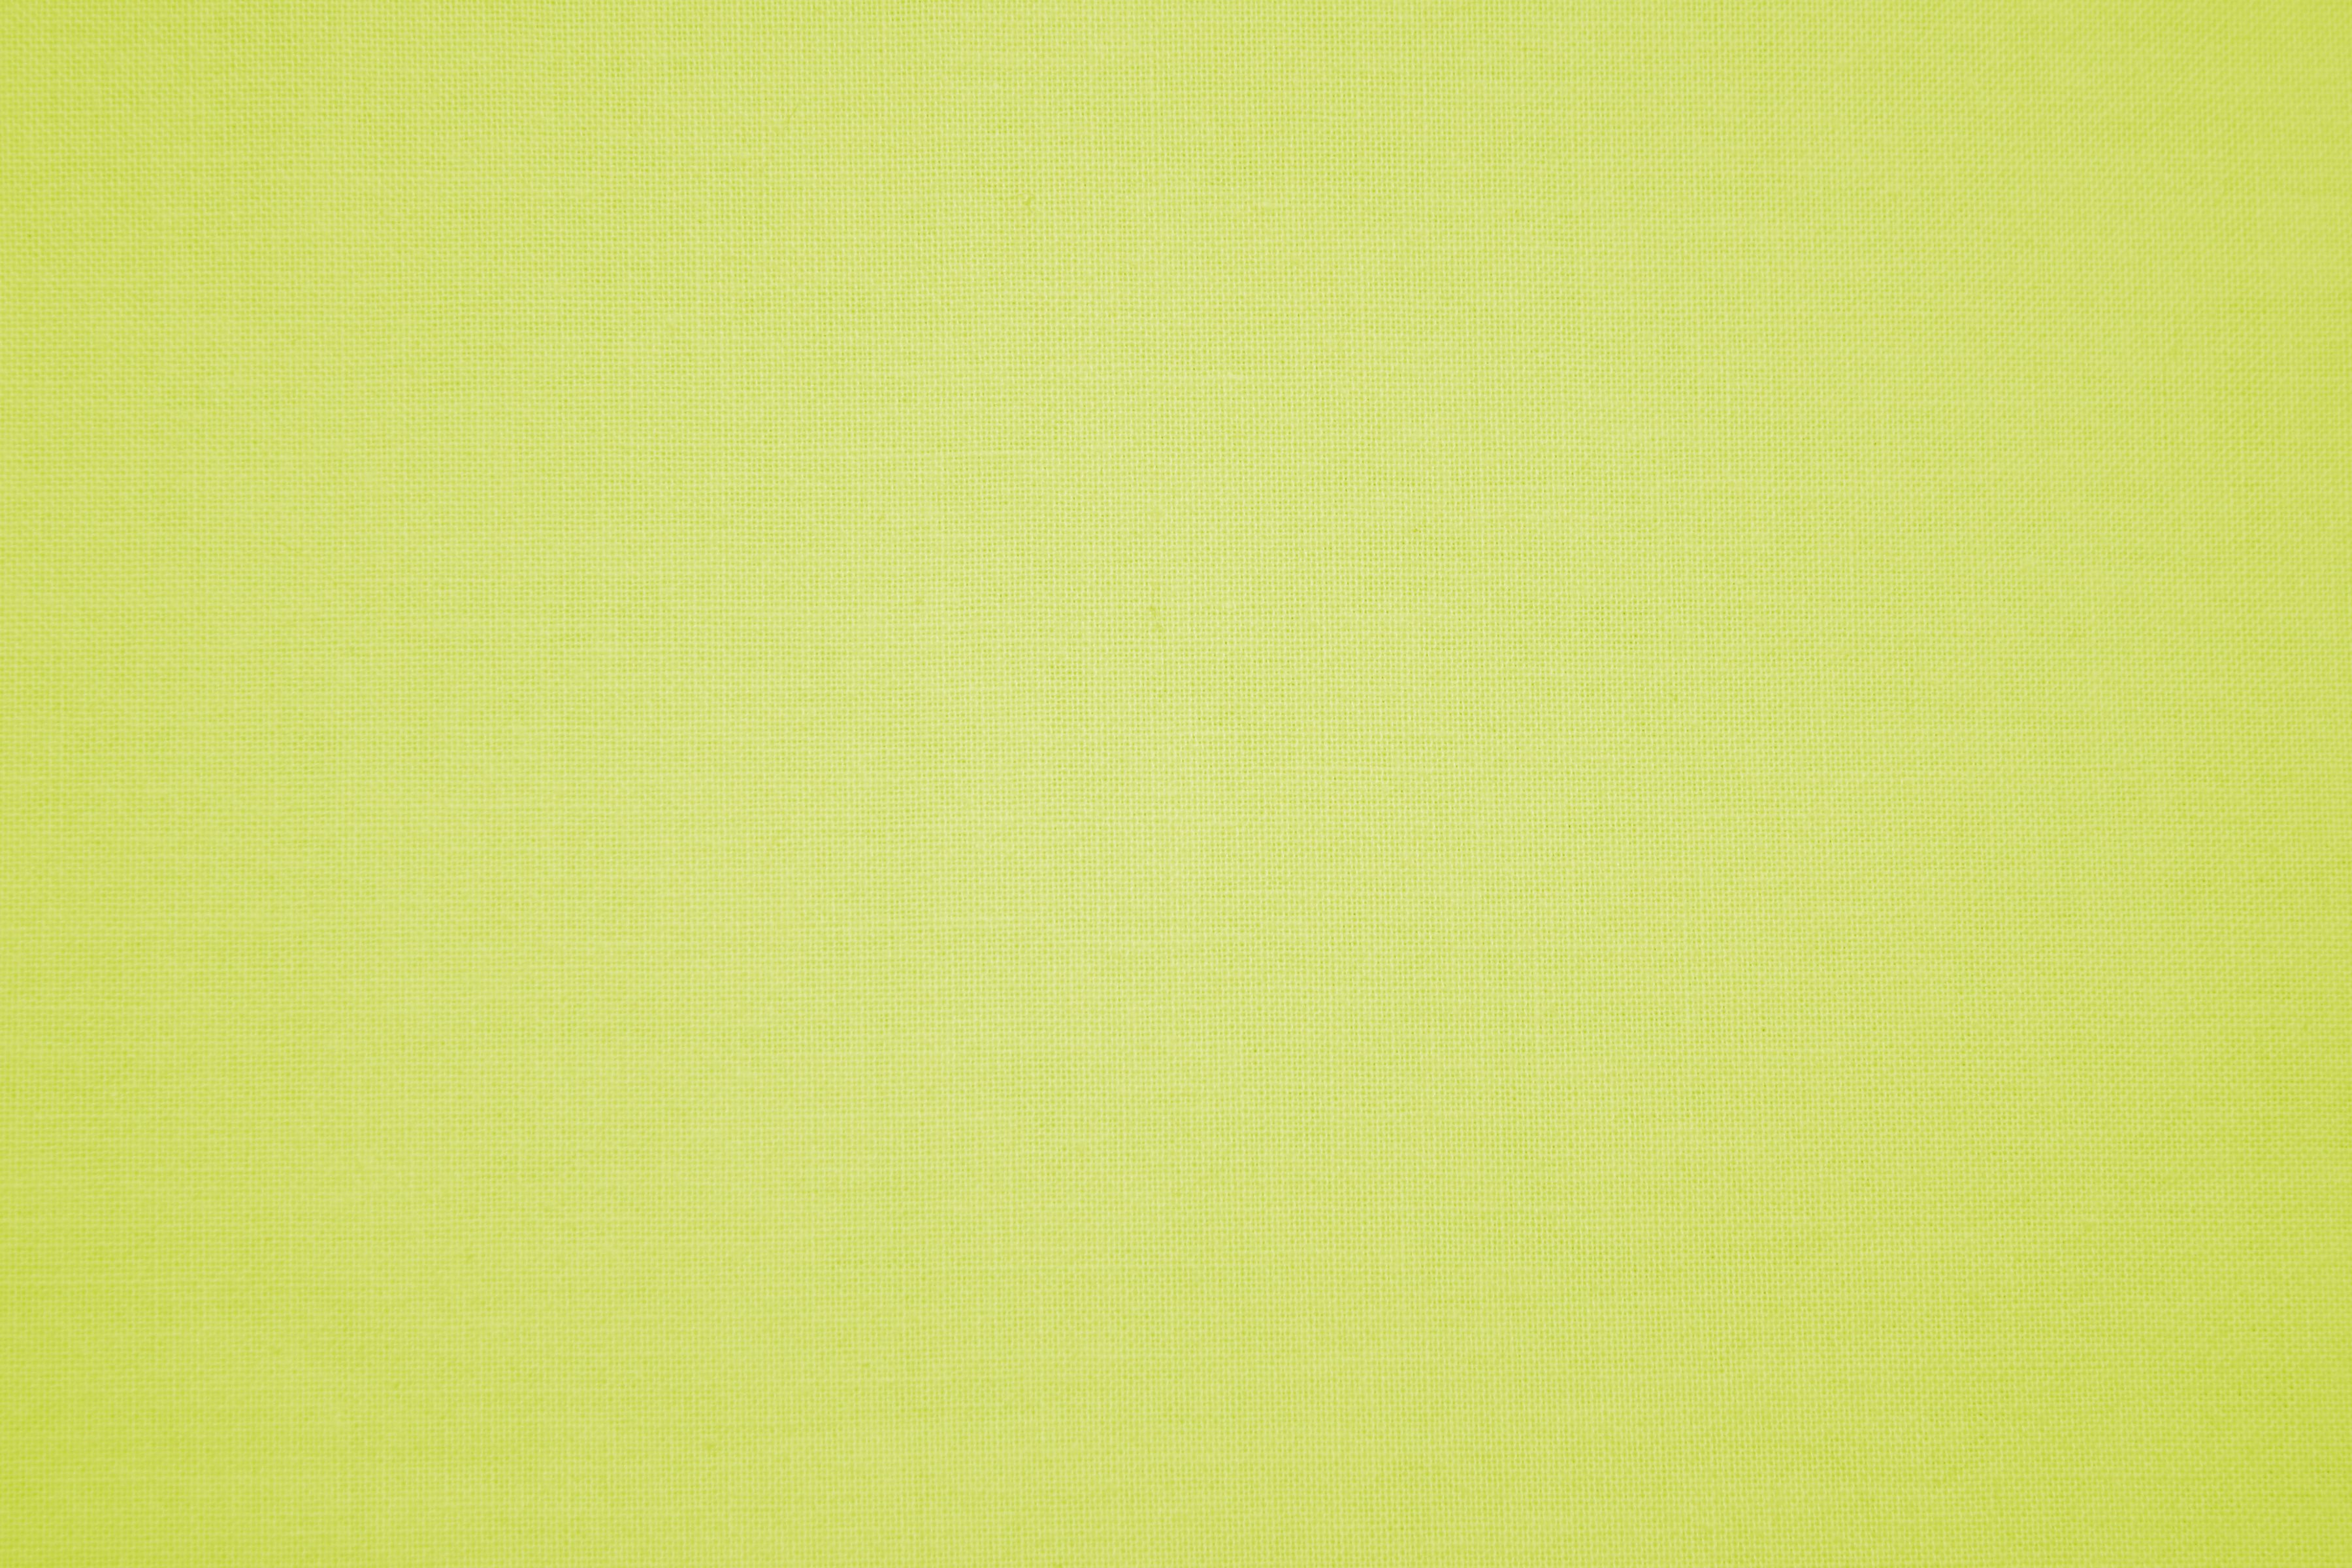 Yellow Green Canvas Fabric Texture Picture | Free Photograph ...